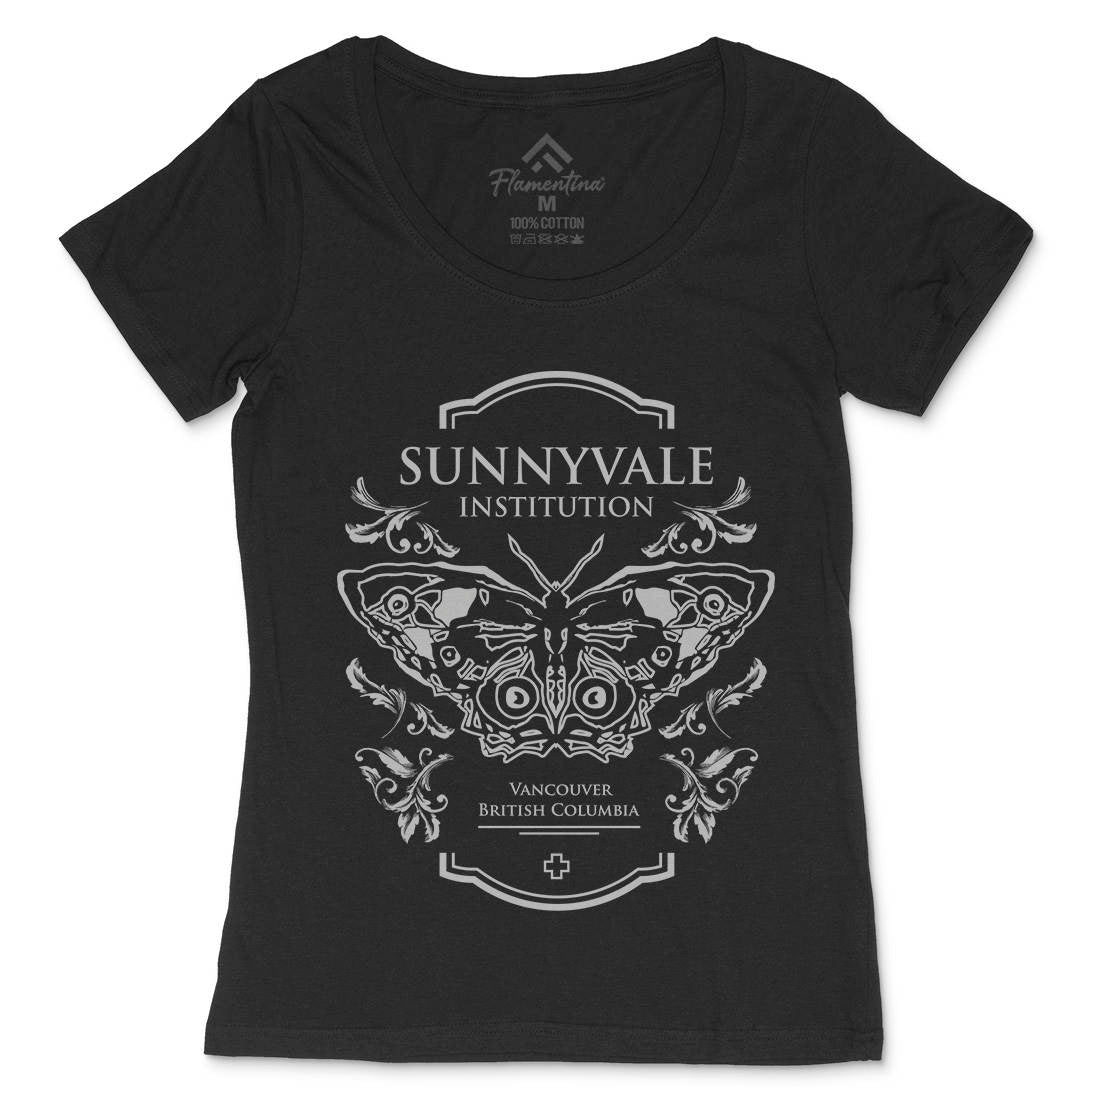 Sunnyvale Institution Womens Scoop Neck T-Shirt Space D232